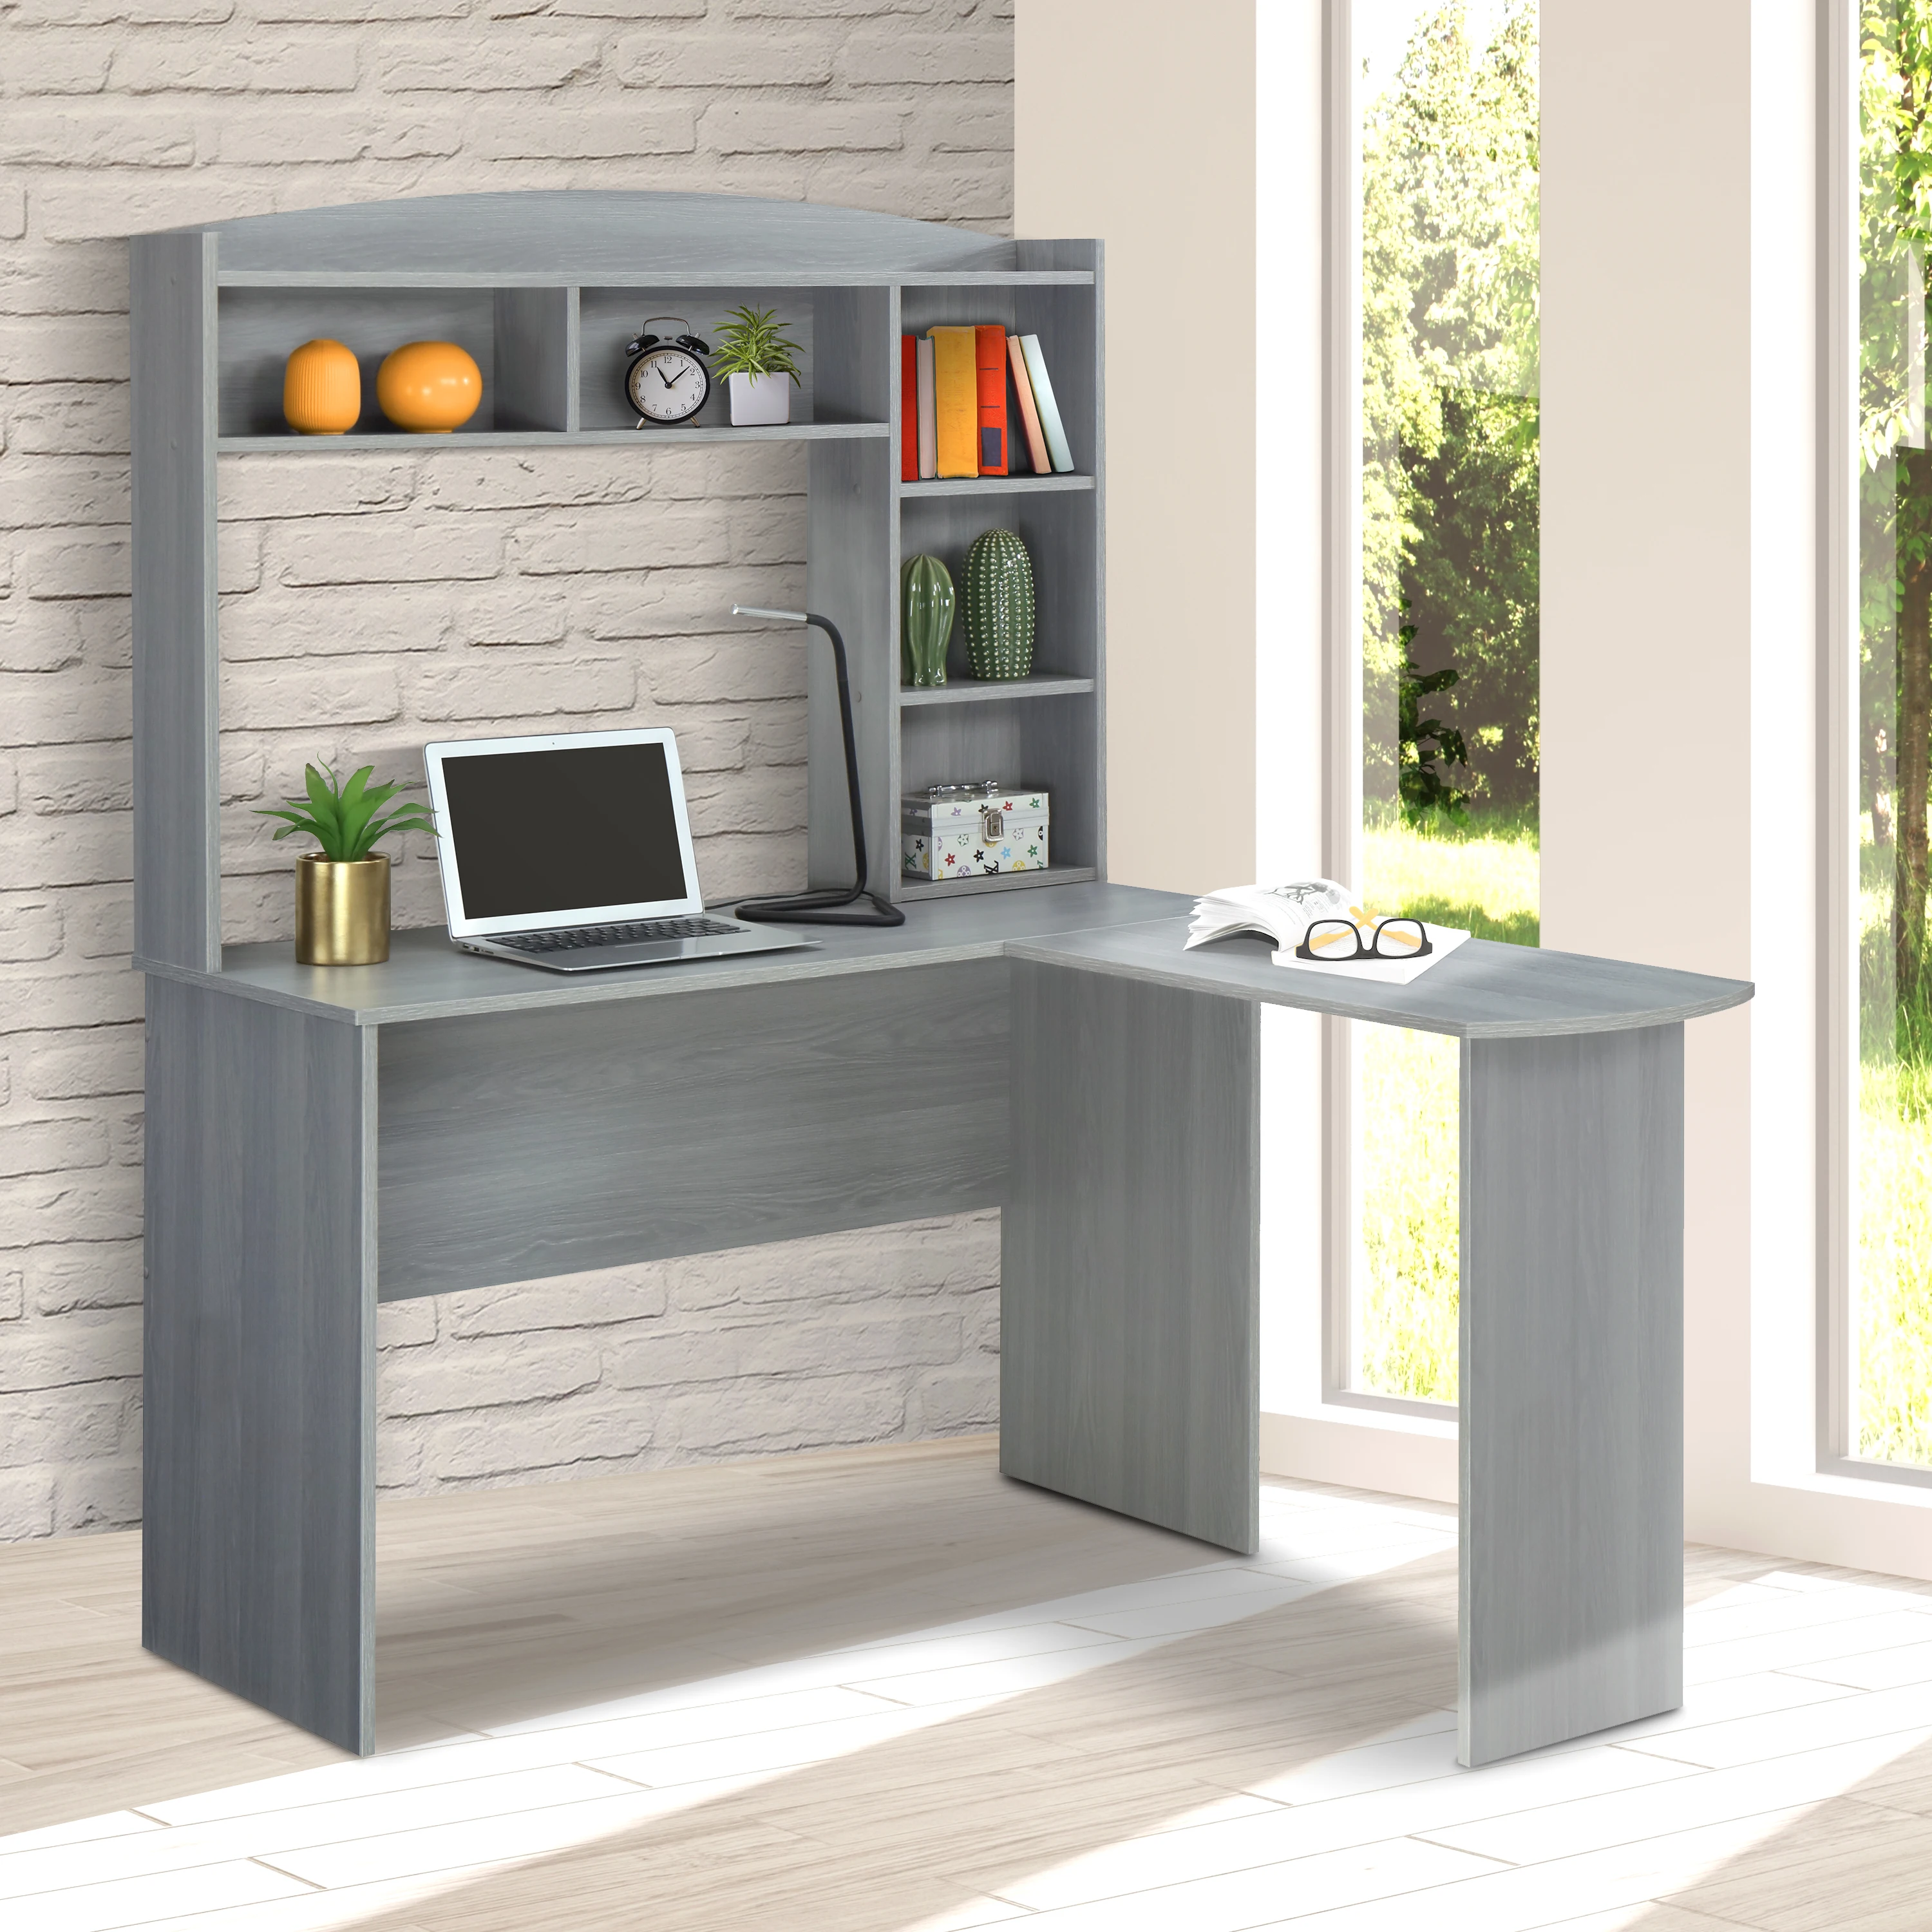 Modern Wood L-Shaped Computer Desk with Hutch Office Study Table Grey[US-W] outdoor large rabbit hutch brown and white 145x45x85 cm wood